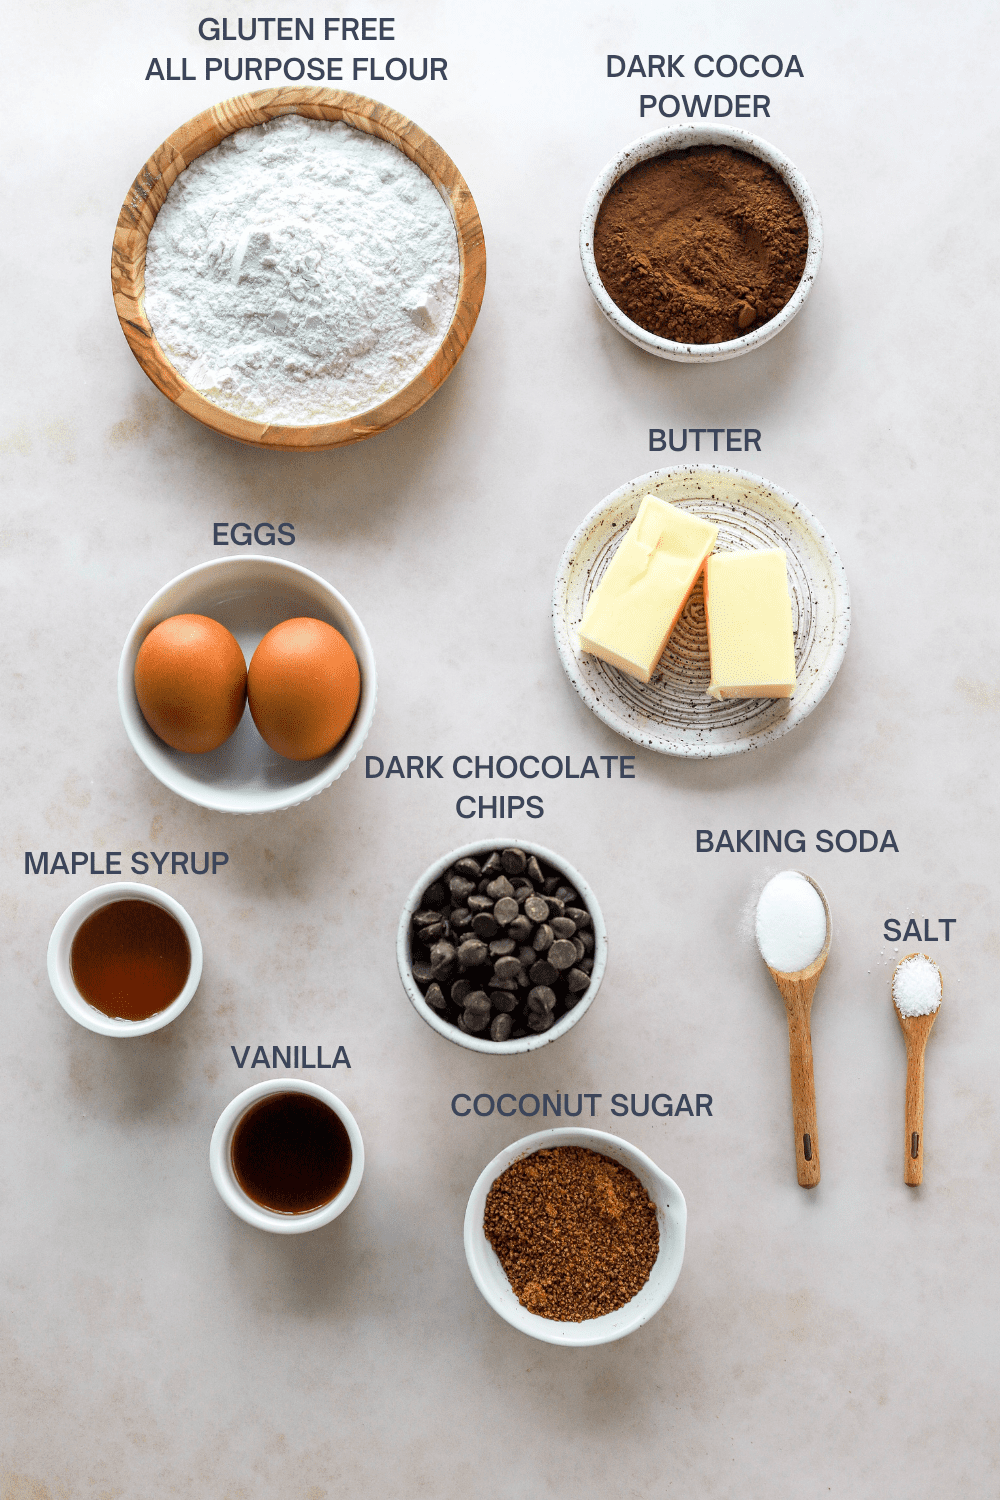 Round wooden bowl of flour with a bowl of cocoa powder next to it and a couple of eggs, butter, maple syrup, chocolate chips, vanilla, sugar, baking soda and salt in front of it. 